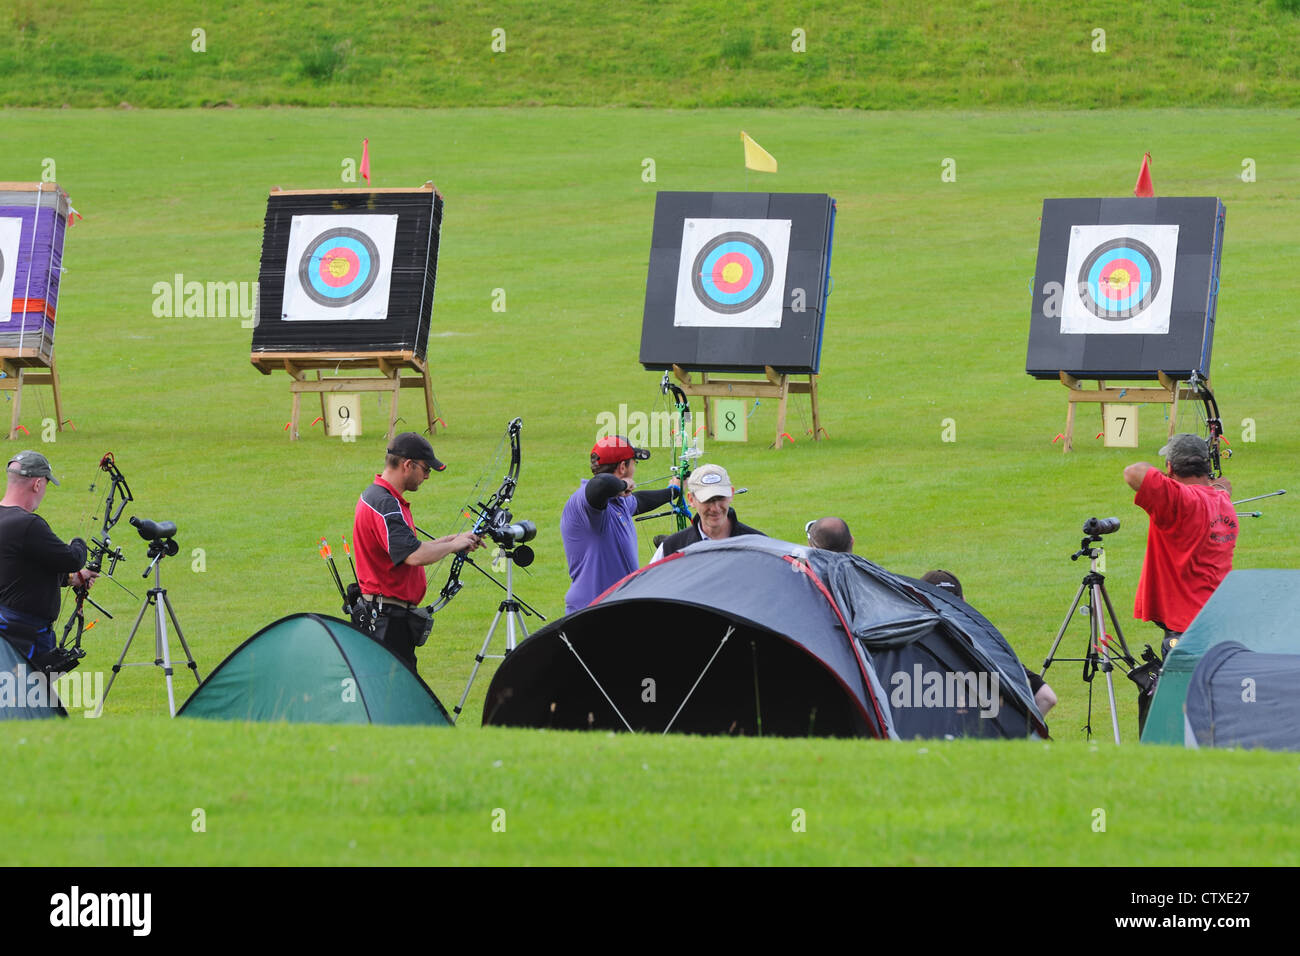 Members of the Glasgow Archers club with tented shelters and targets in Scotland, UK Stock Photo